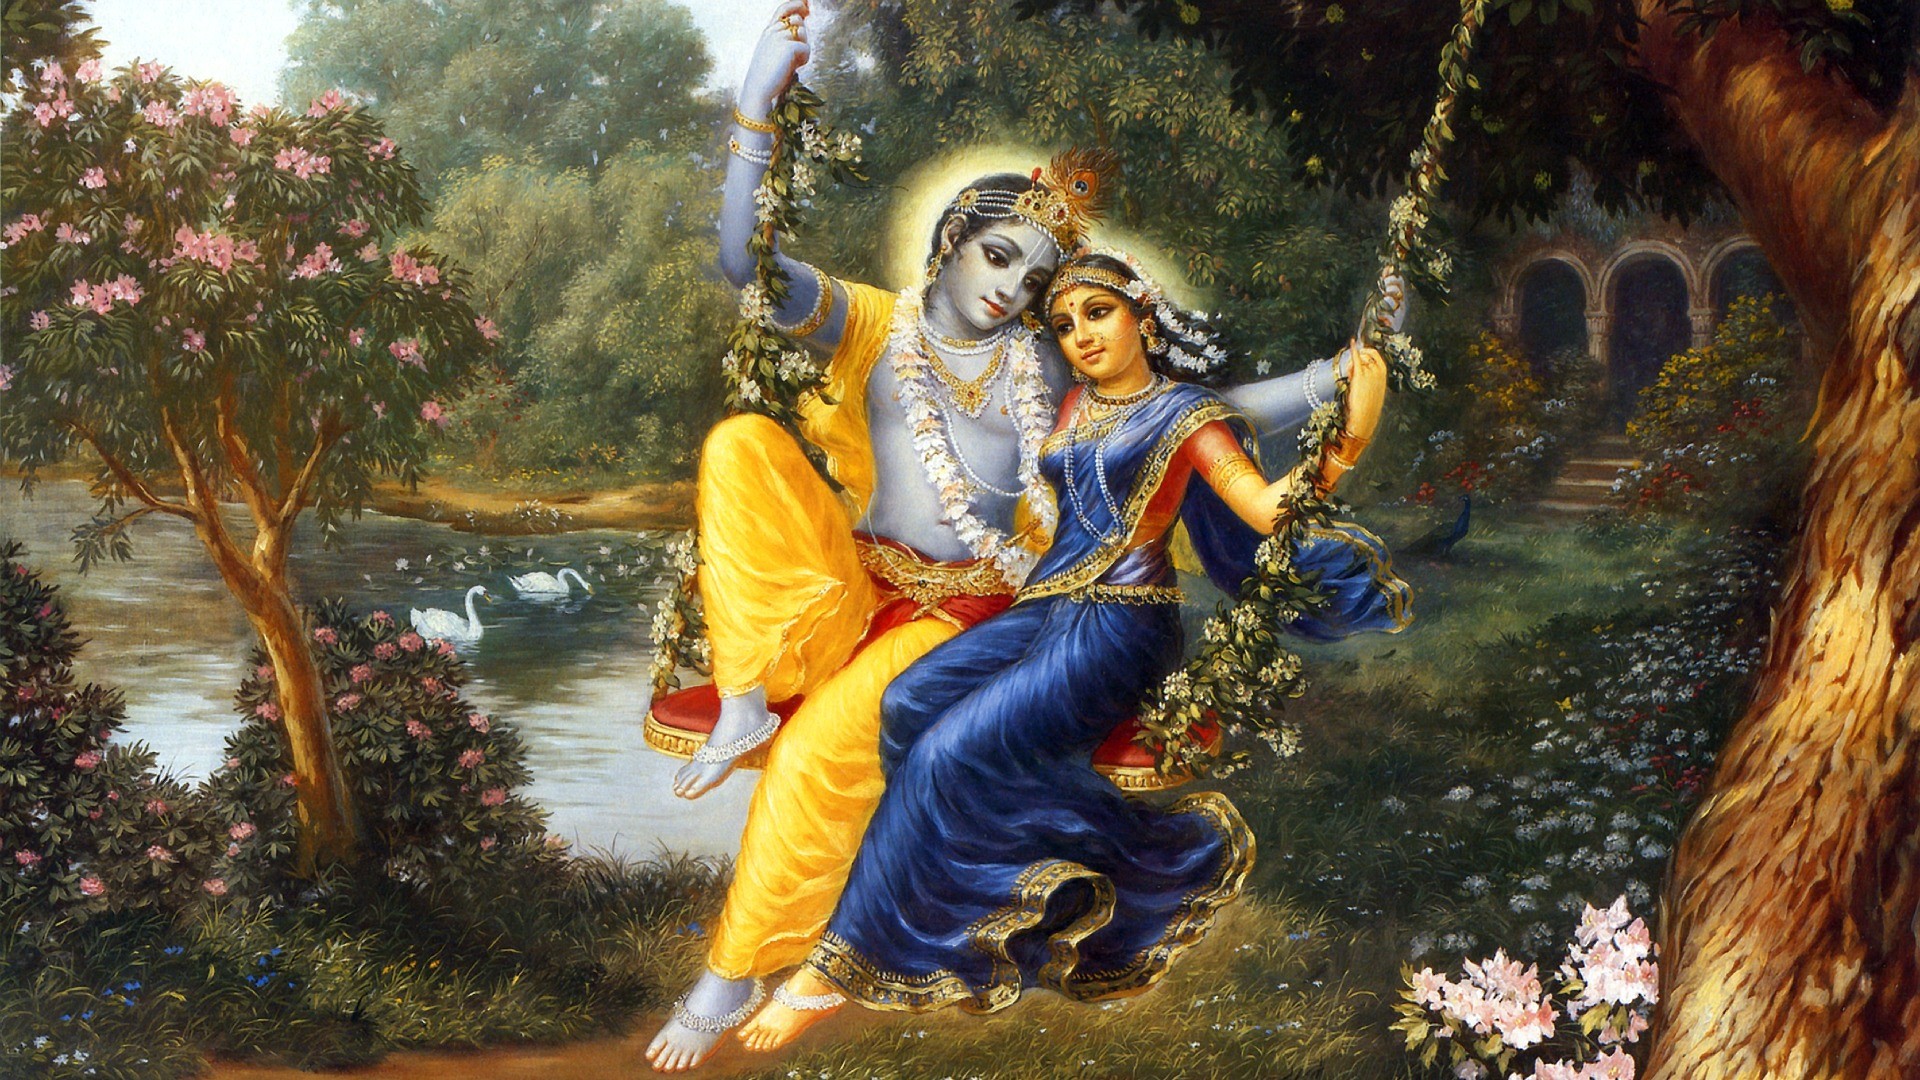 RADHA KRISHNA ON FINE ART PAPER HD QUALITY WALLPAPER POSTER Fine Art Print  - Religious posters in India - Buy art, film, design, movie, music, nature  and educational paintings/wallpapers at Flipkart.com